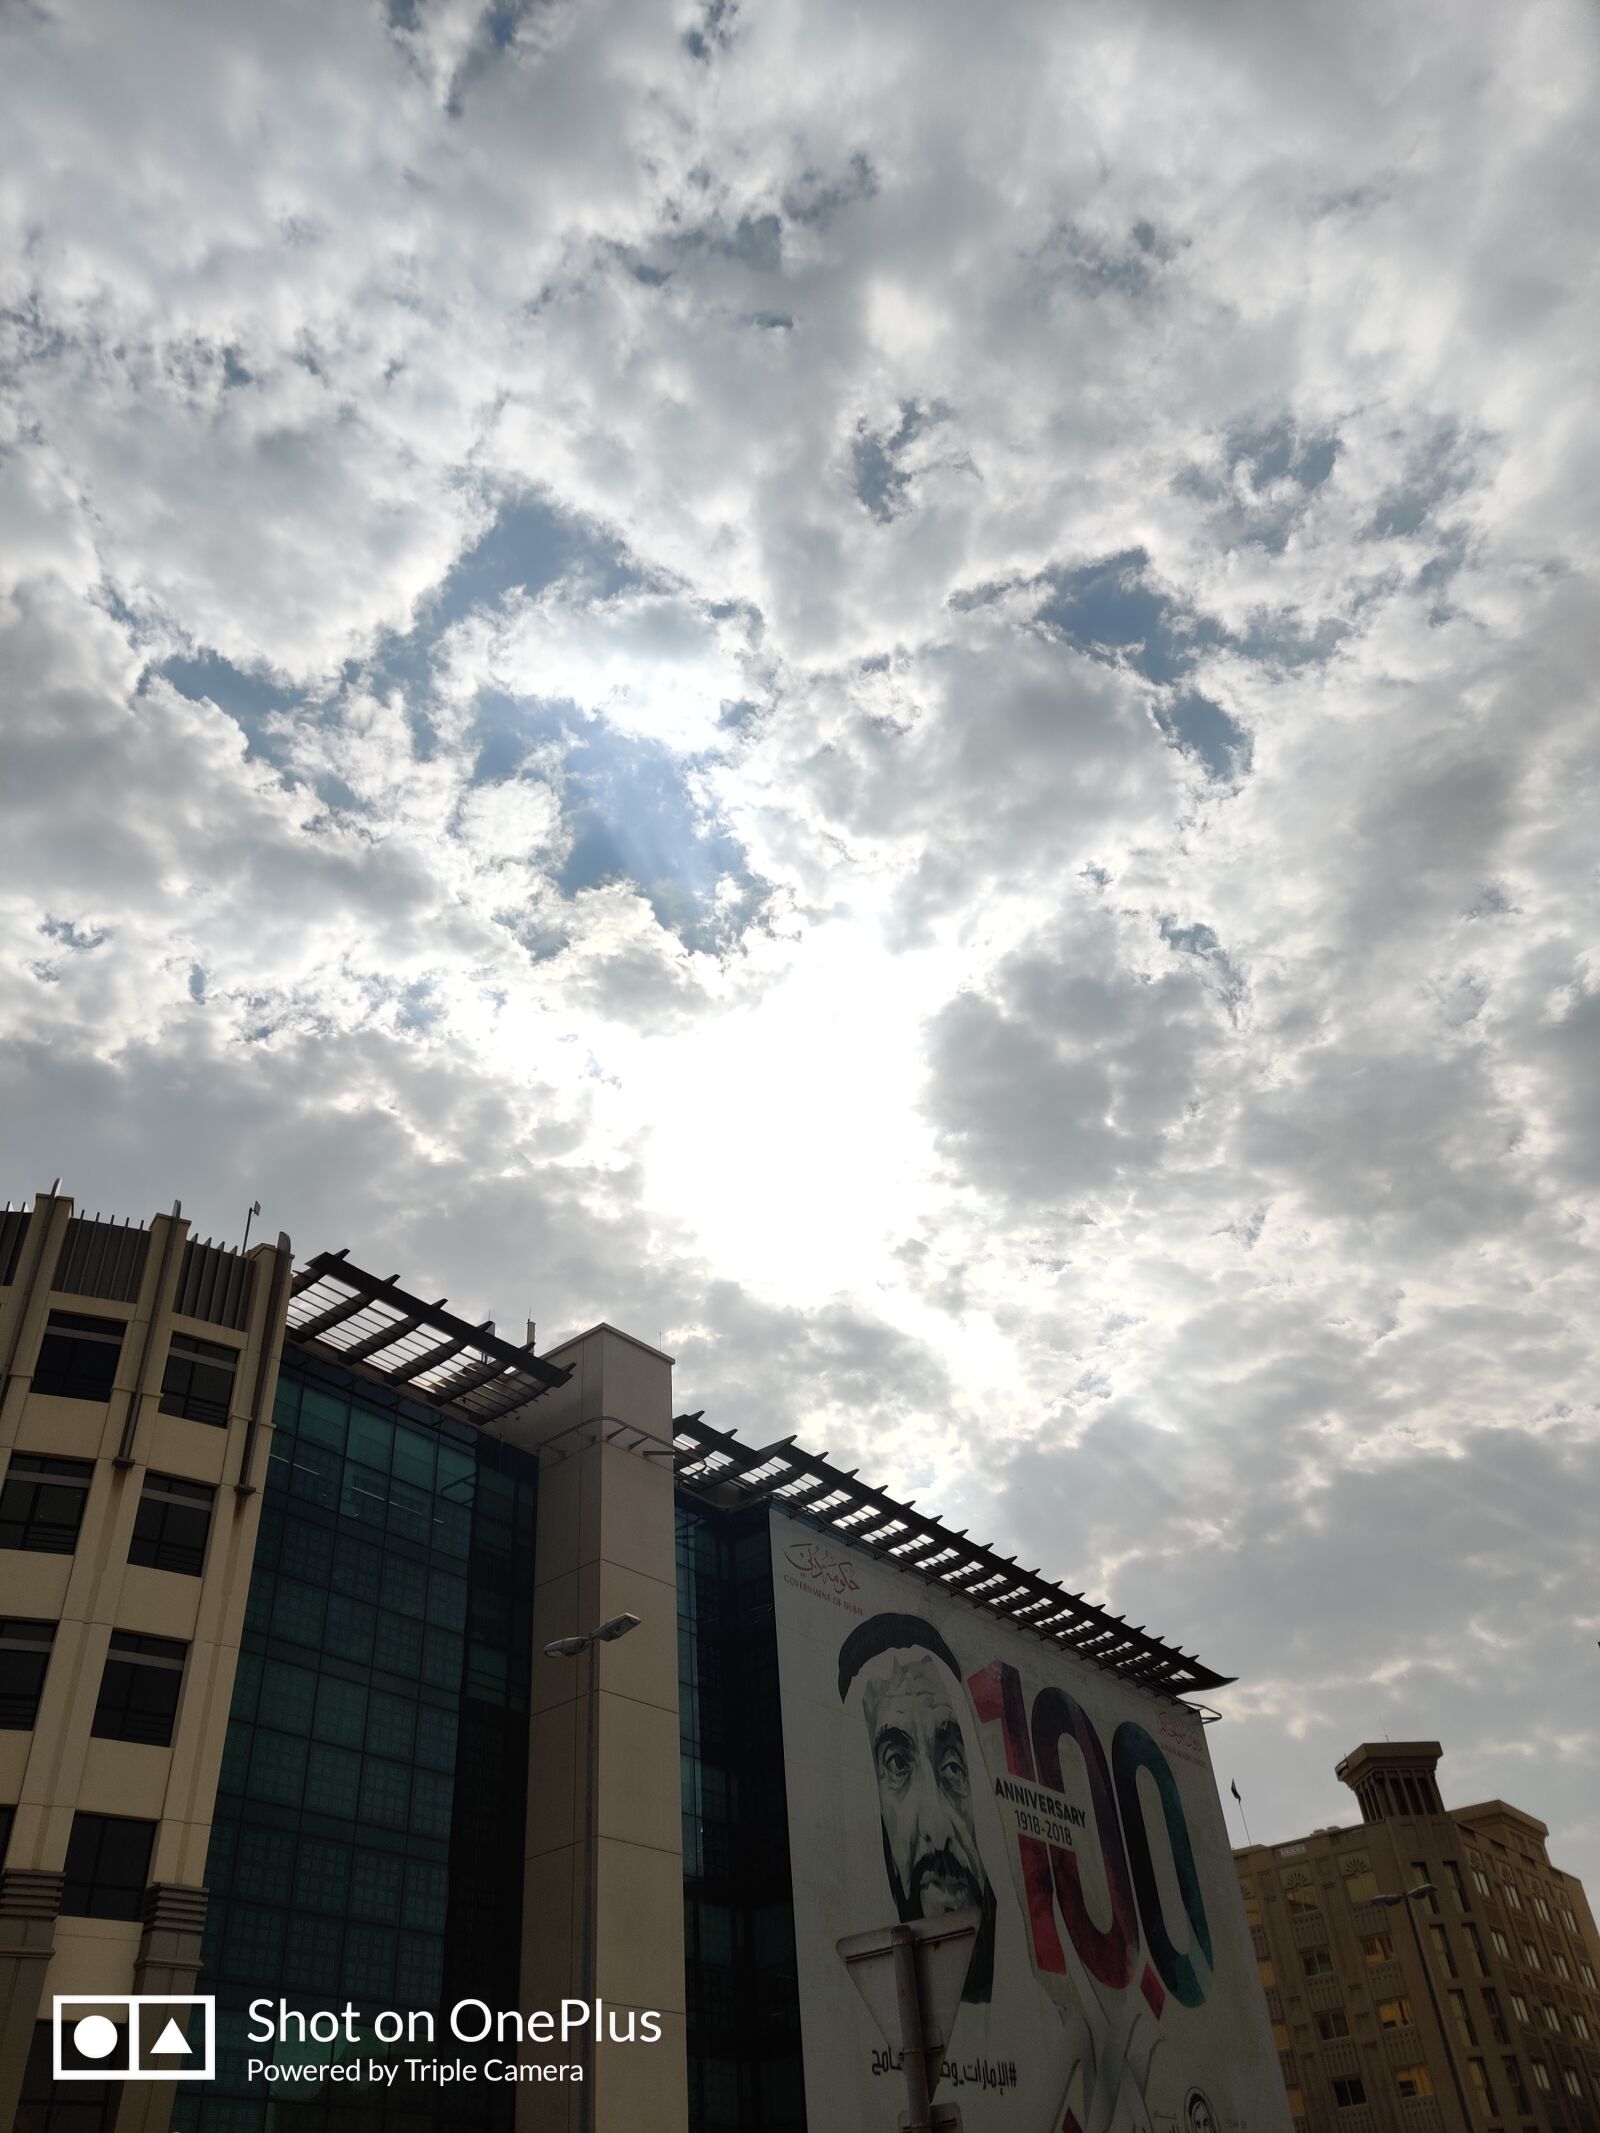 OnePlus HD1911 sample photo. Sky, buildings, clouds photography